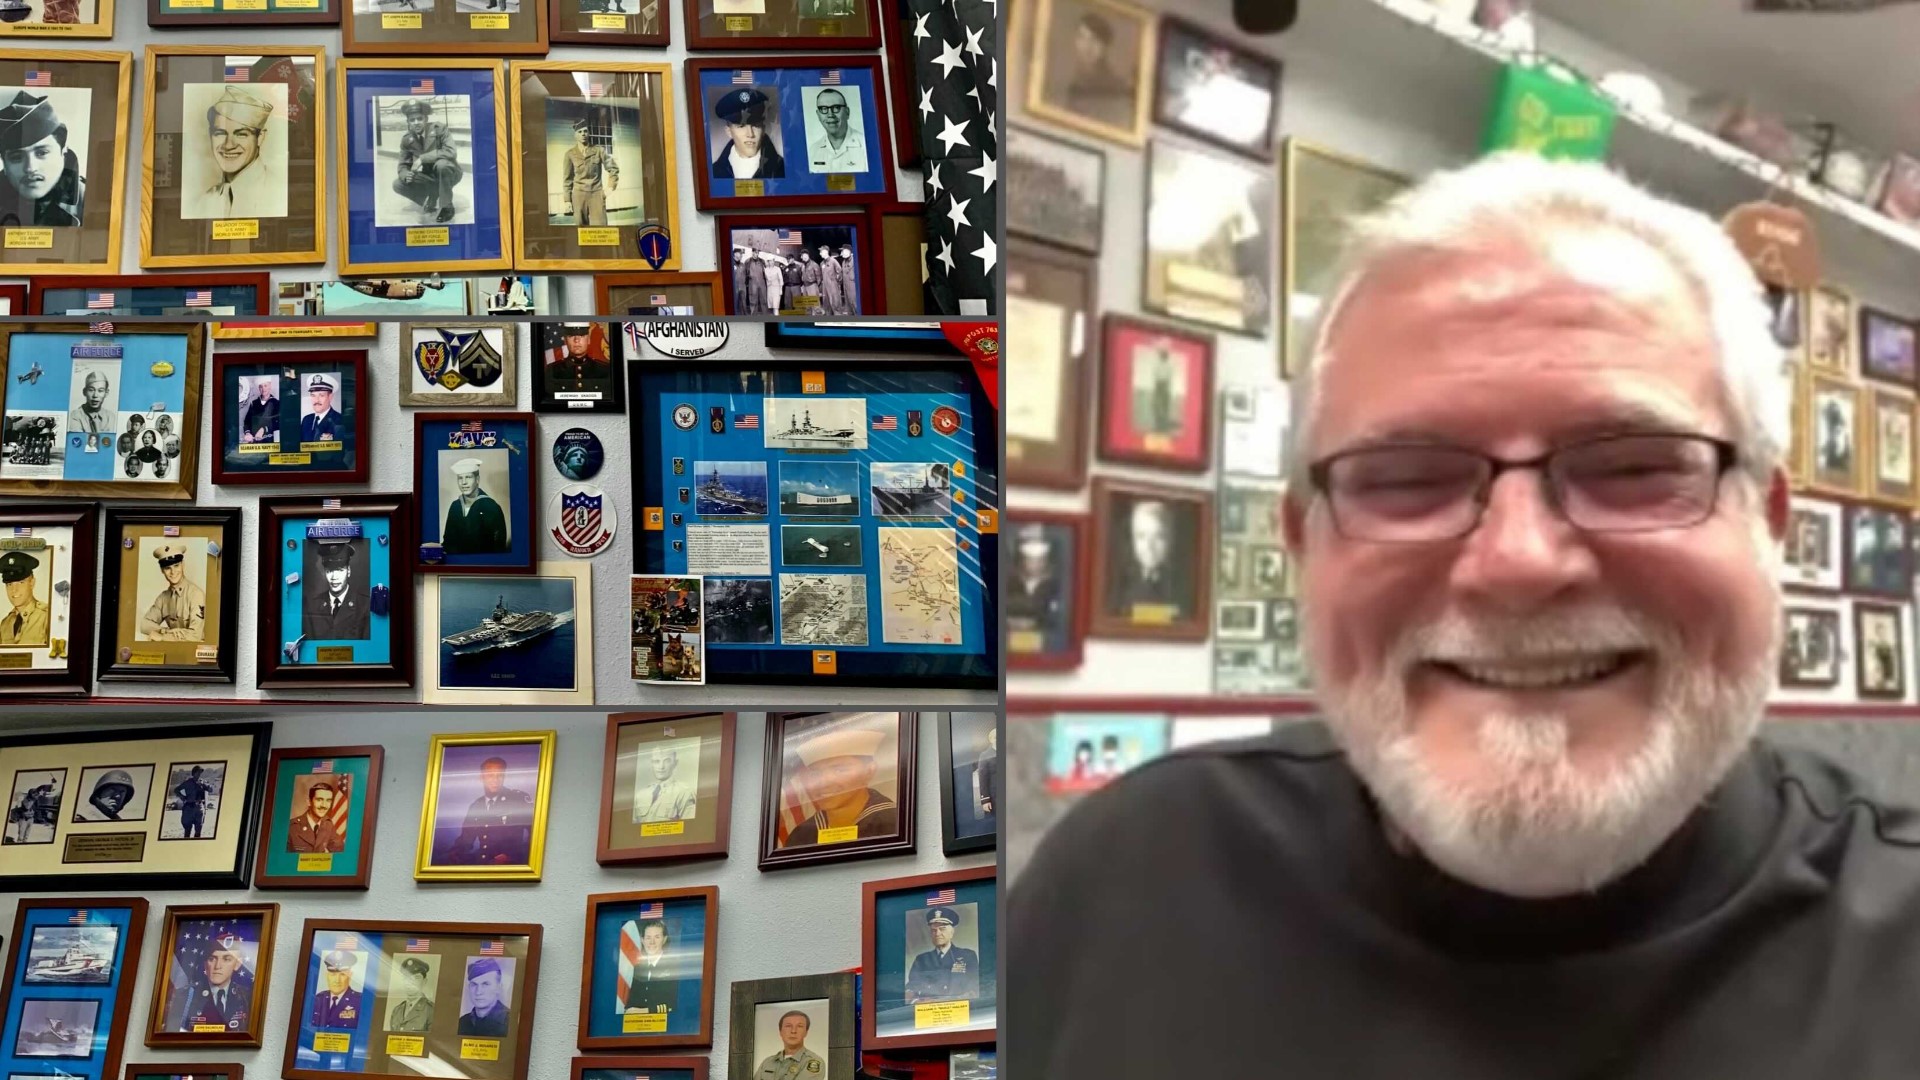 For 31 years, Bobby Page has been growing his collection of 250 veteran photos from the very customers he serves.